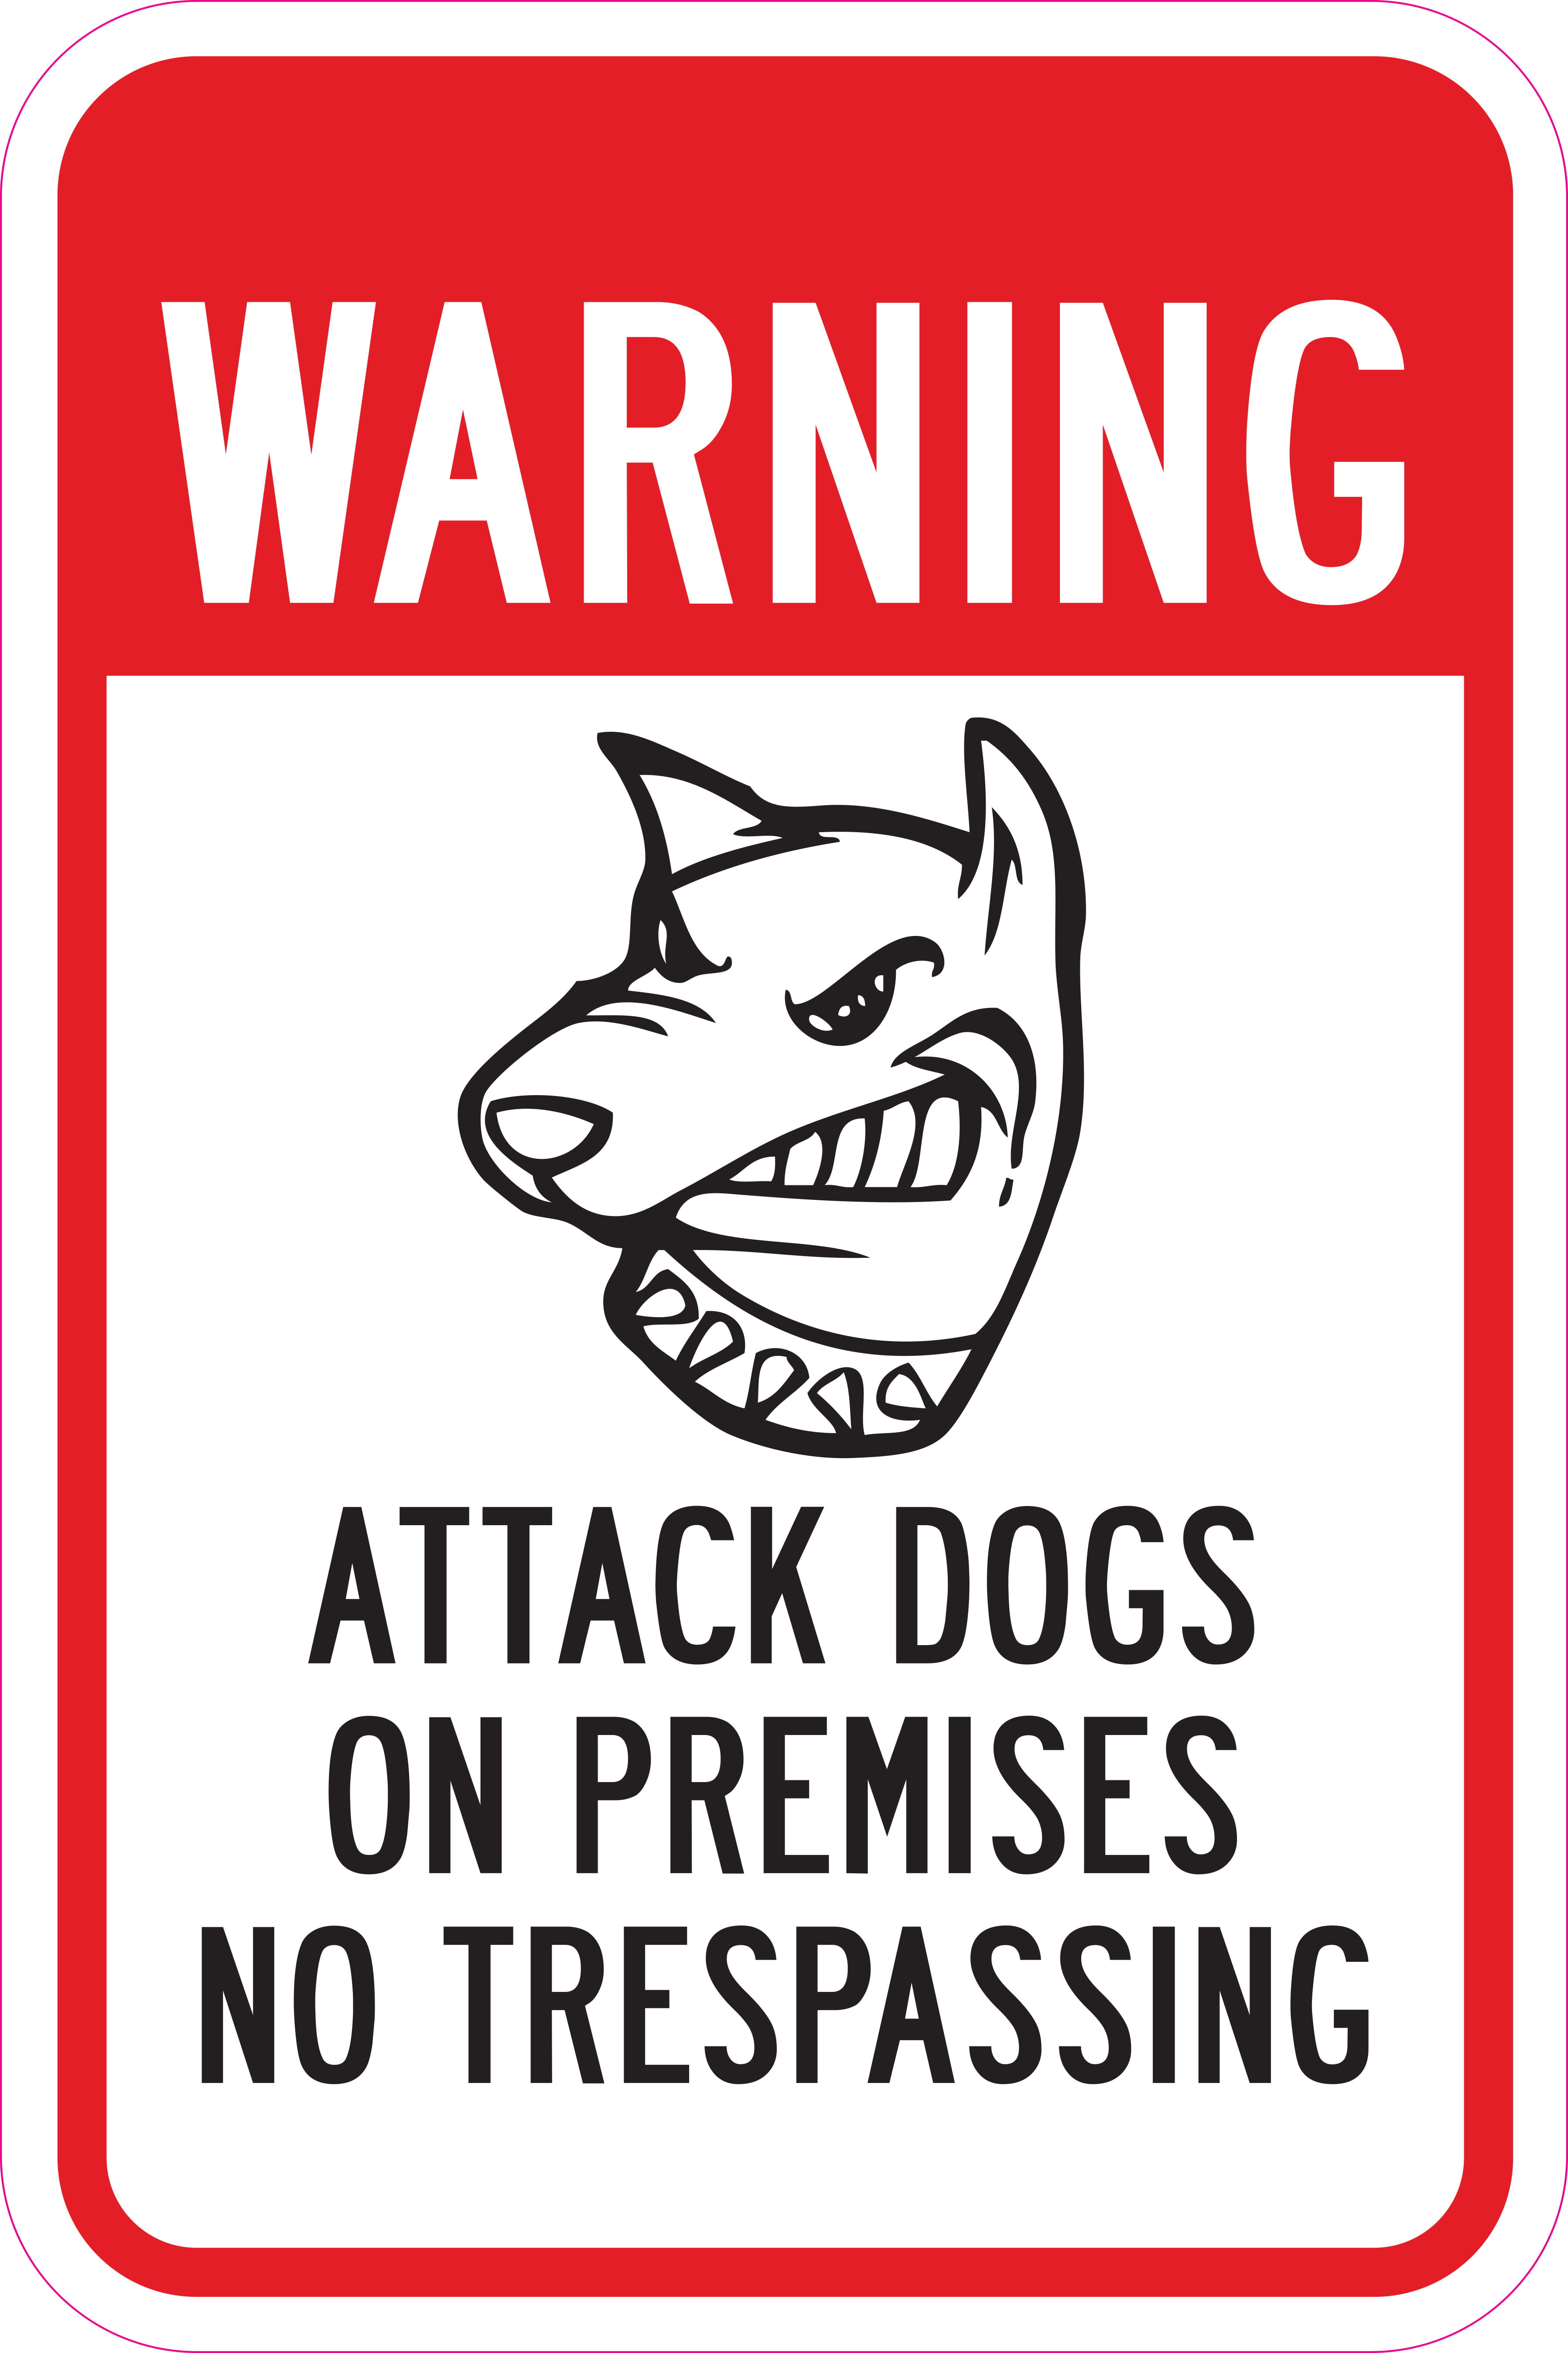 HEAVYWEIGHT ALUMINUM METAL "DOGS ON PREMISES" 10"x7" WARNING SIGNS 4 SIGN SET 